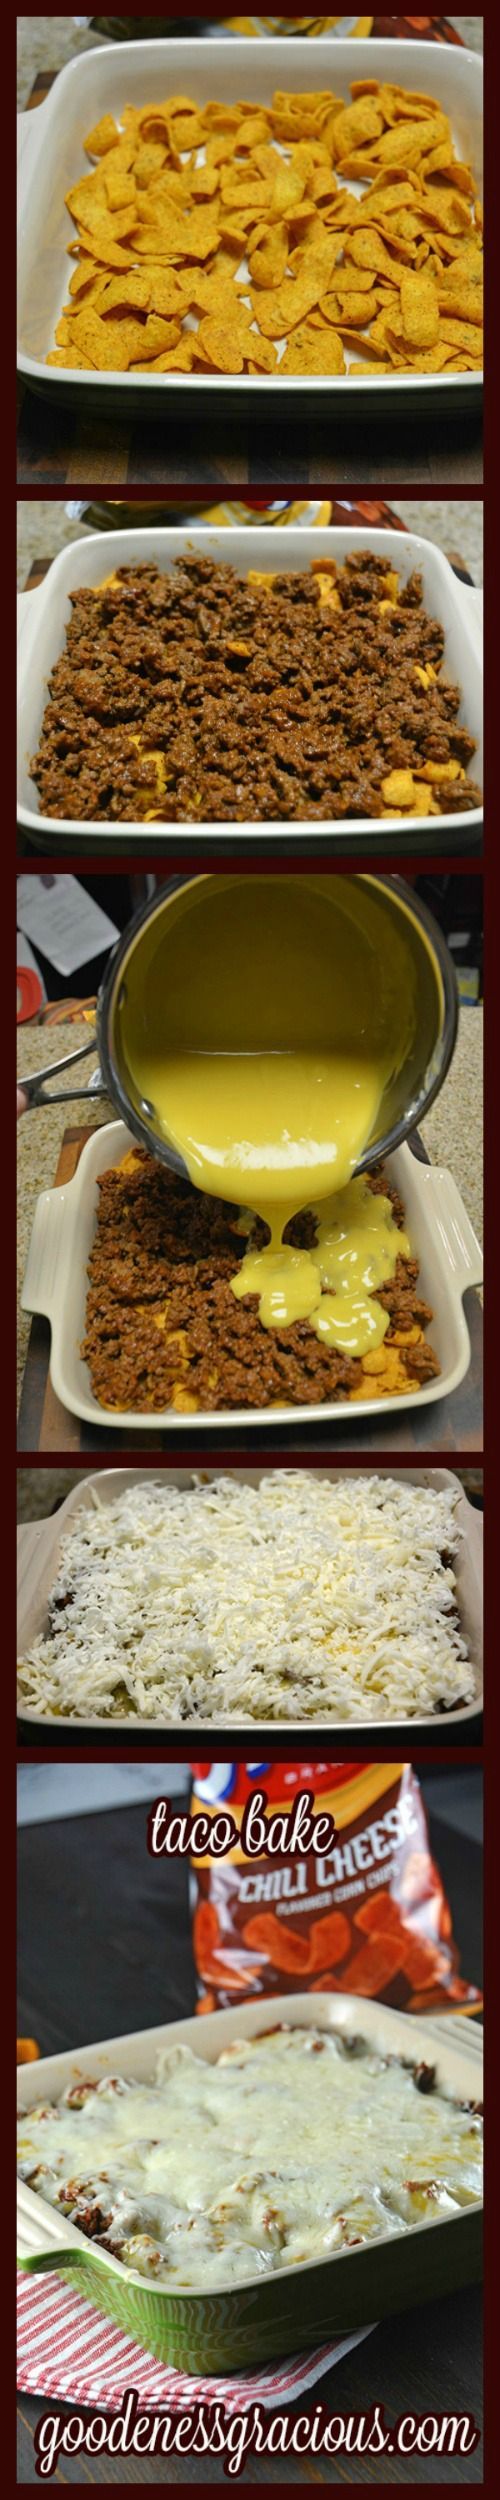 Easy Taco Bake ~ Great taco bake recipe from Gooseberry Patchs Foolproof Family